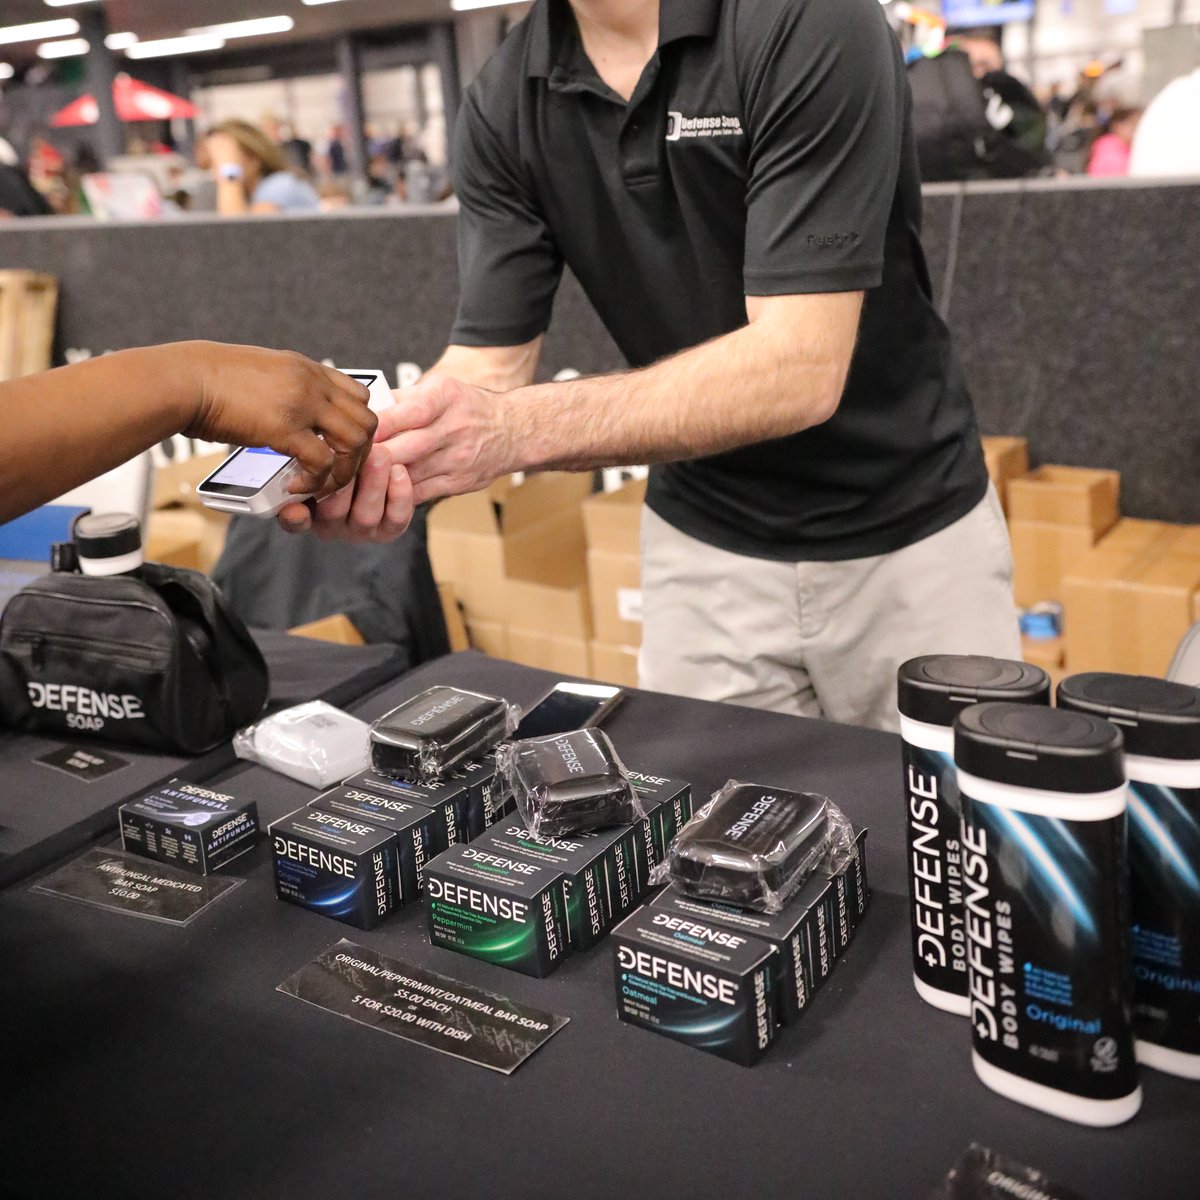 NHSCA competition surfaces are cleaned and protected by @DefenseSoap. Get all your personal skin care needs at the Defense Soap booth at High School Nationals.